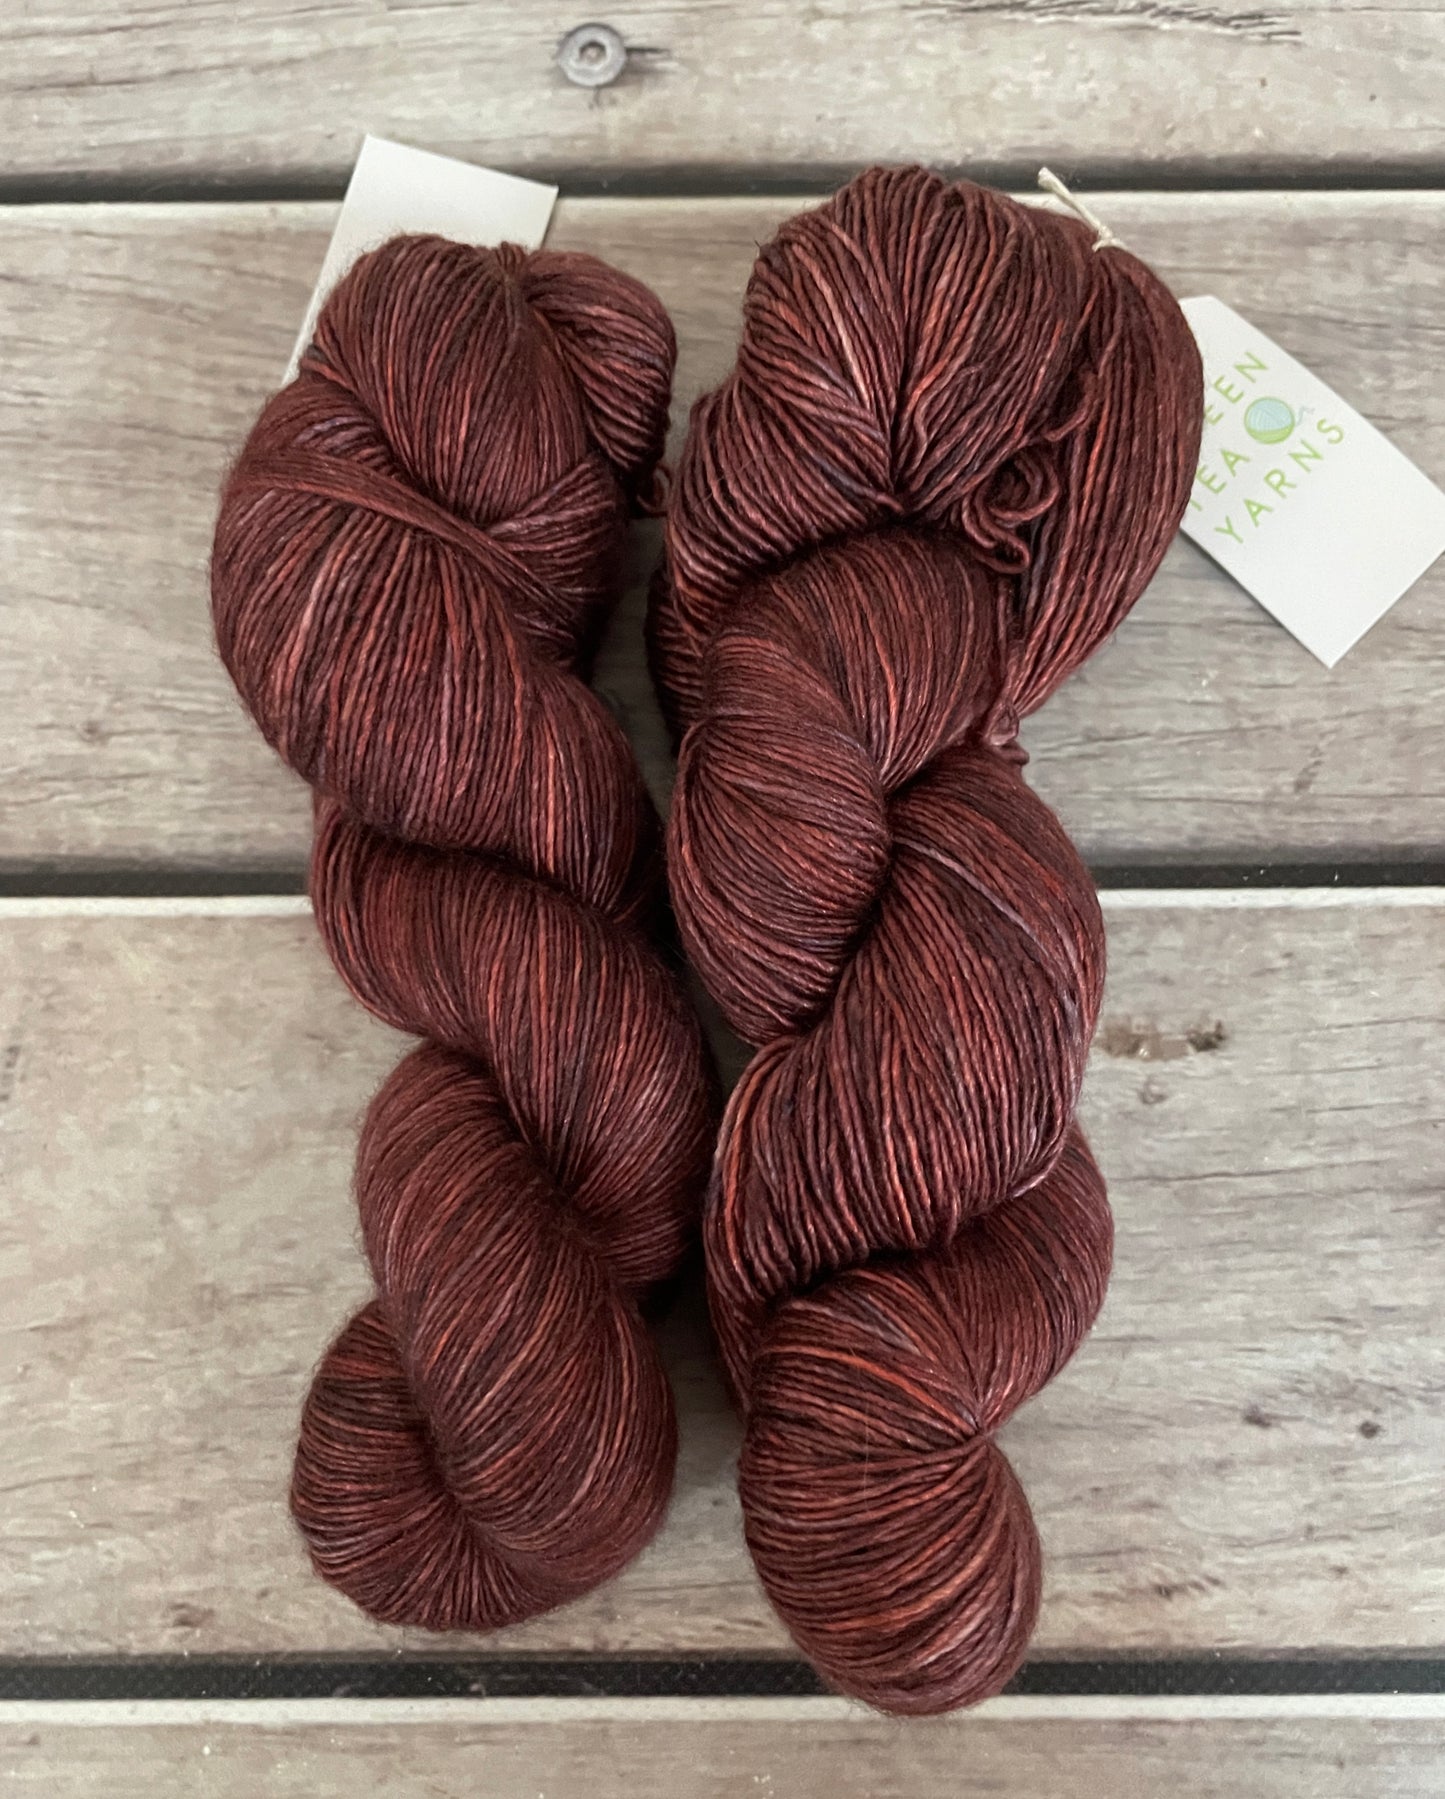 Lava Core - 4 ply in Mulberry silk and Merino singles yarn - Osmanthus